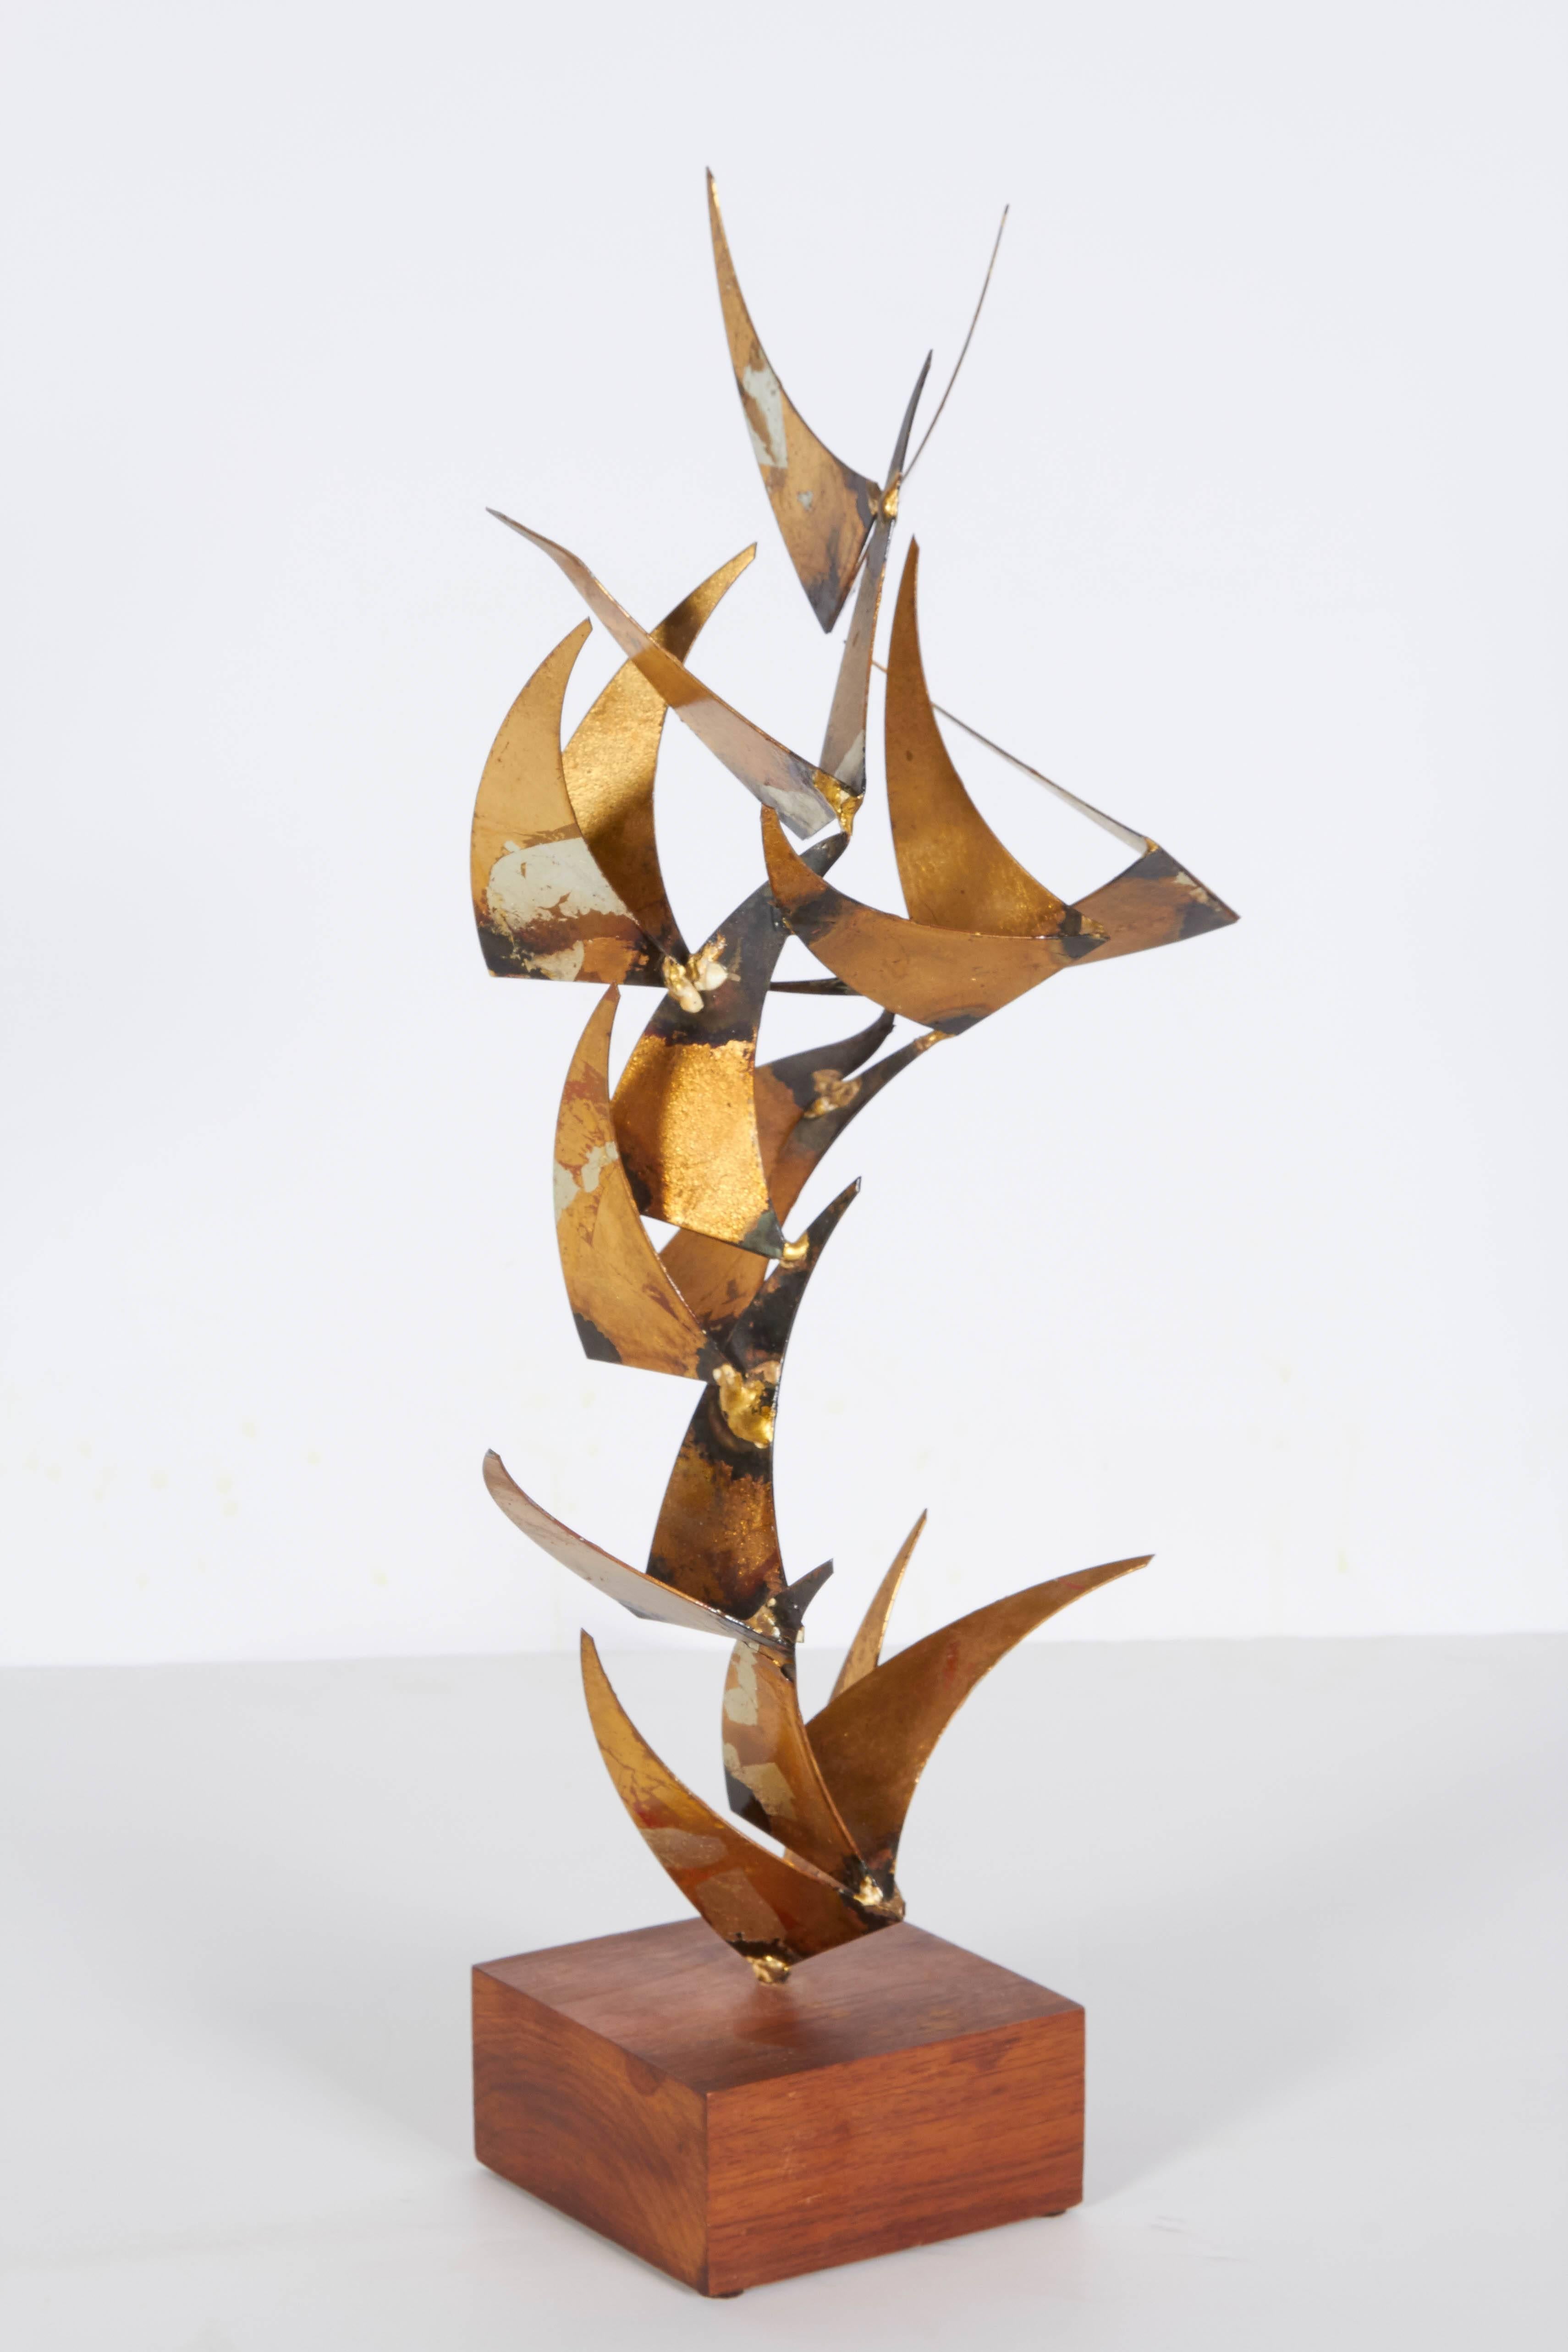 Whimsical Tabletop Sculpture by William Bowie 4